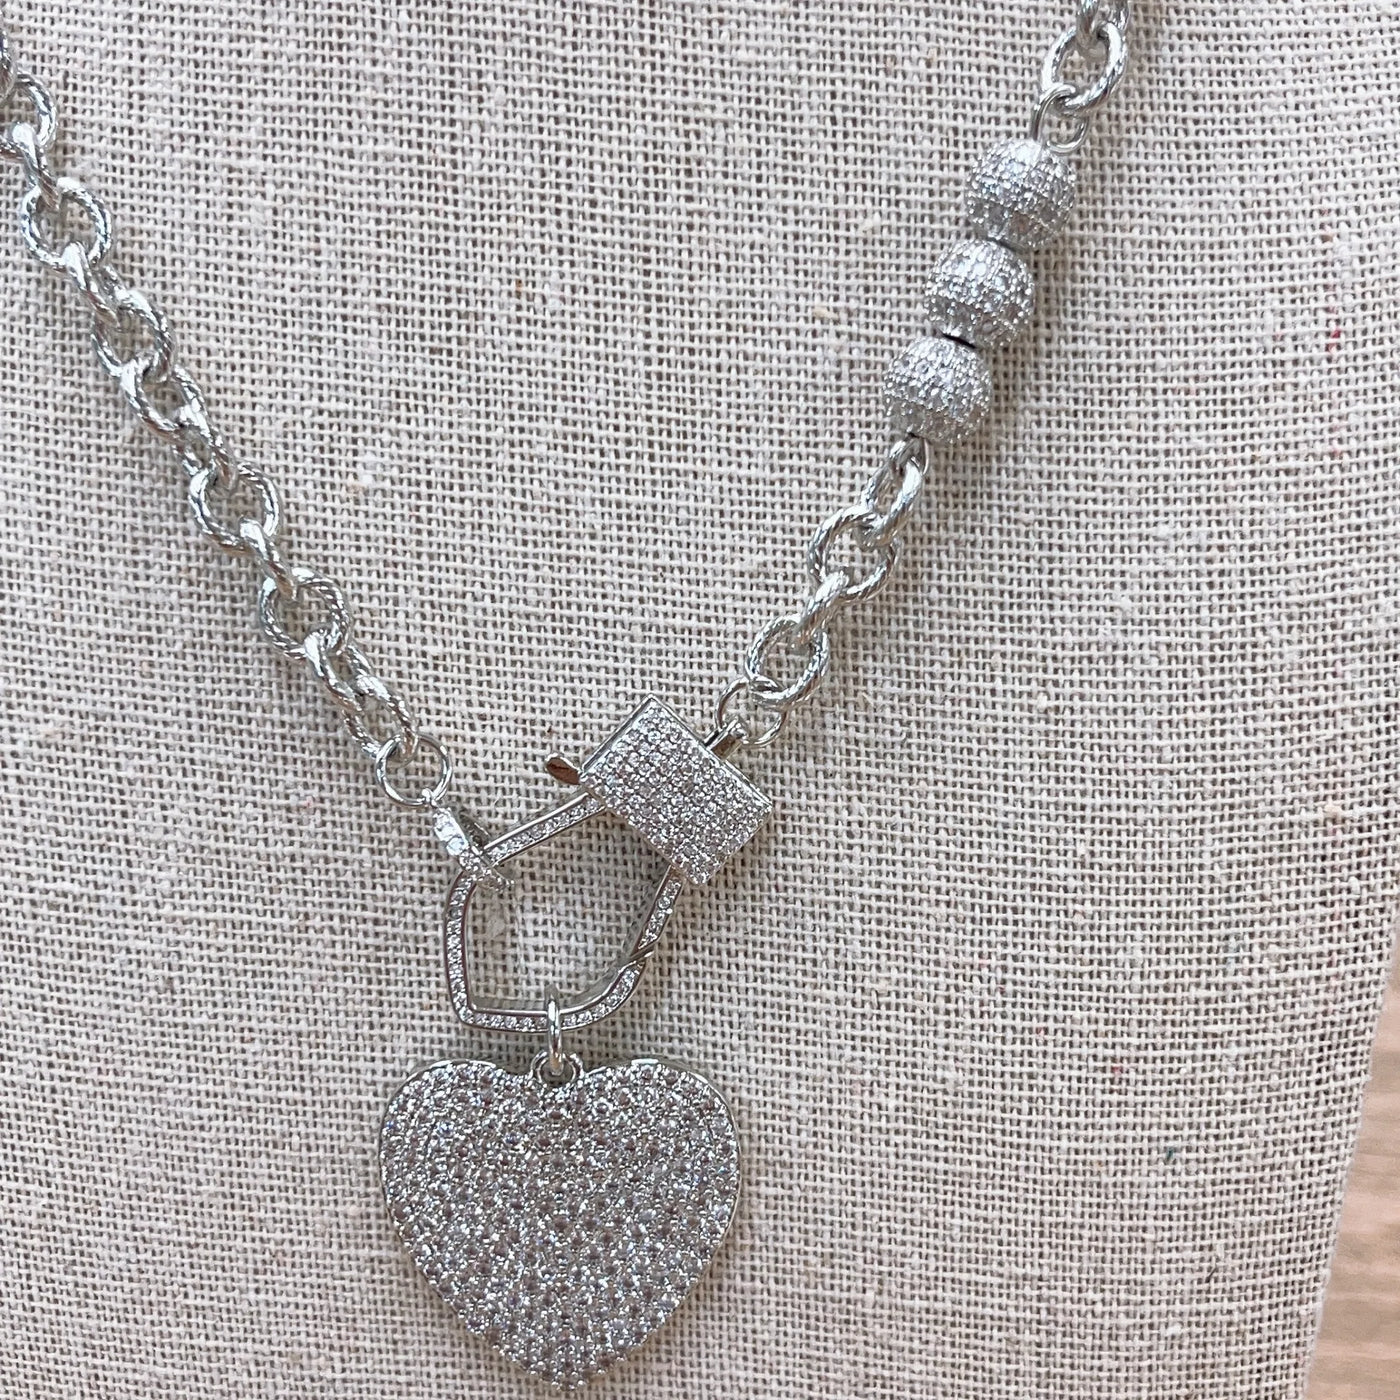 Close to my Heart Necklace